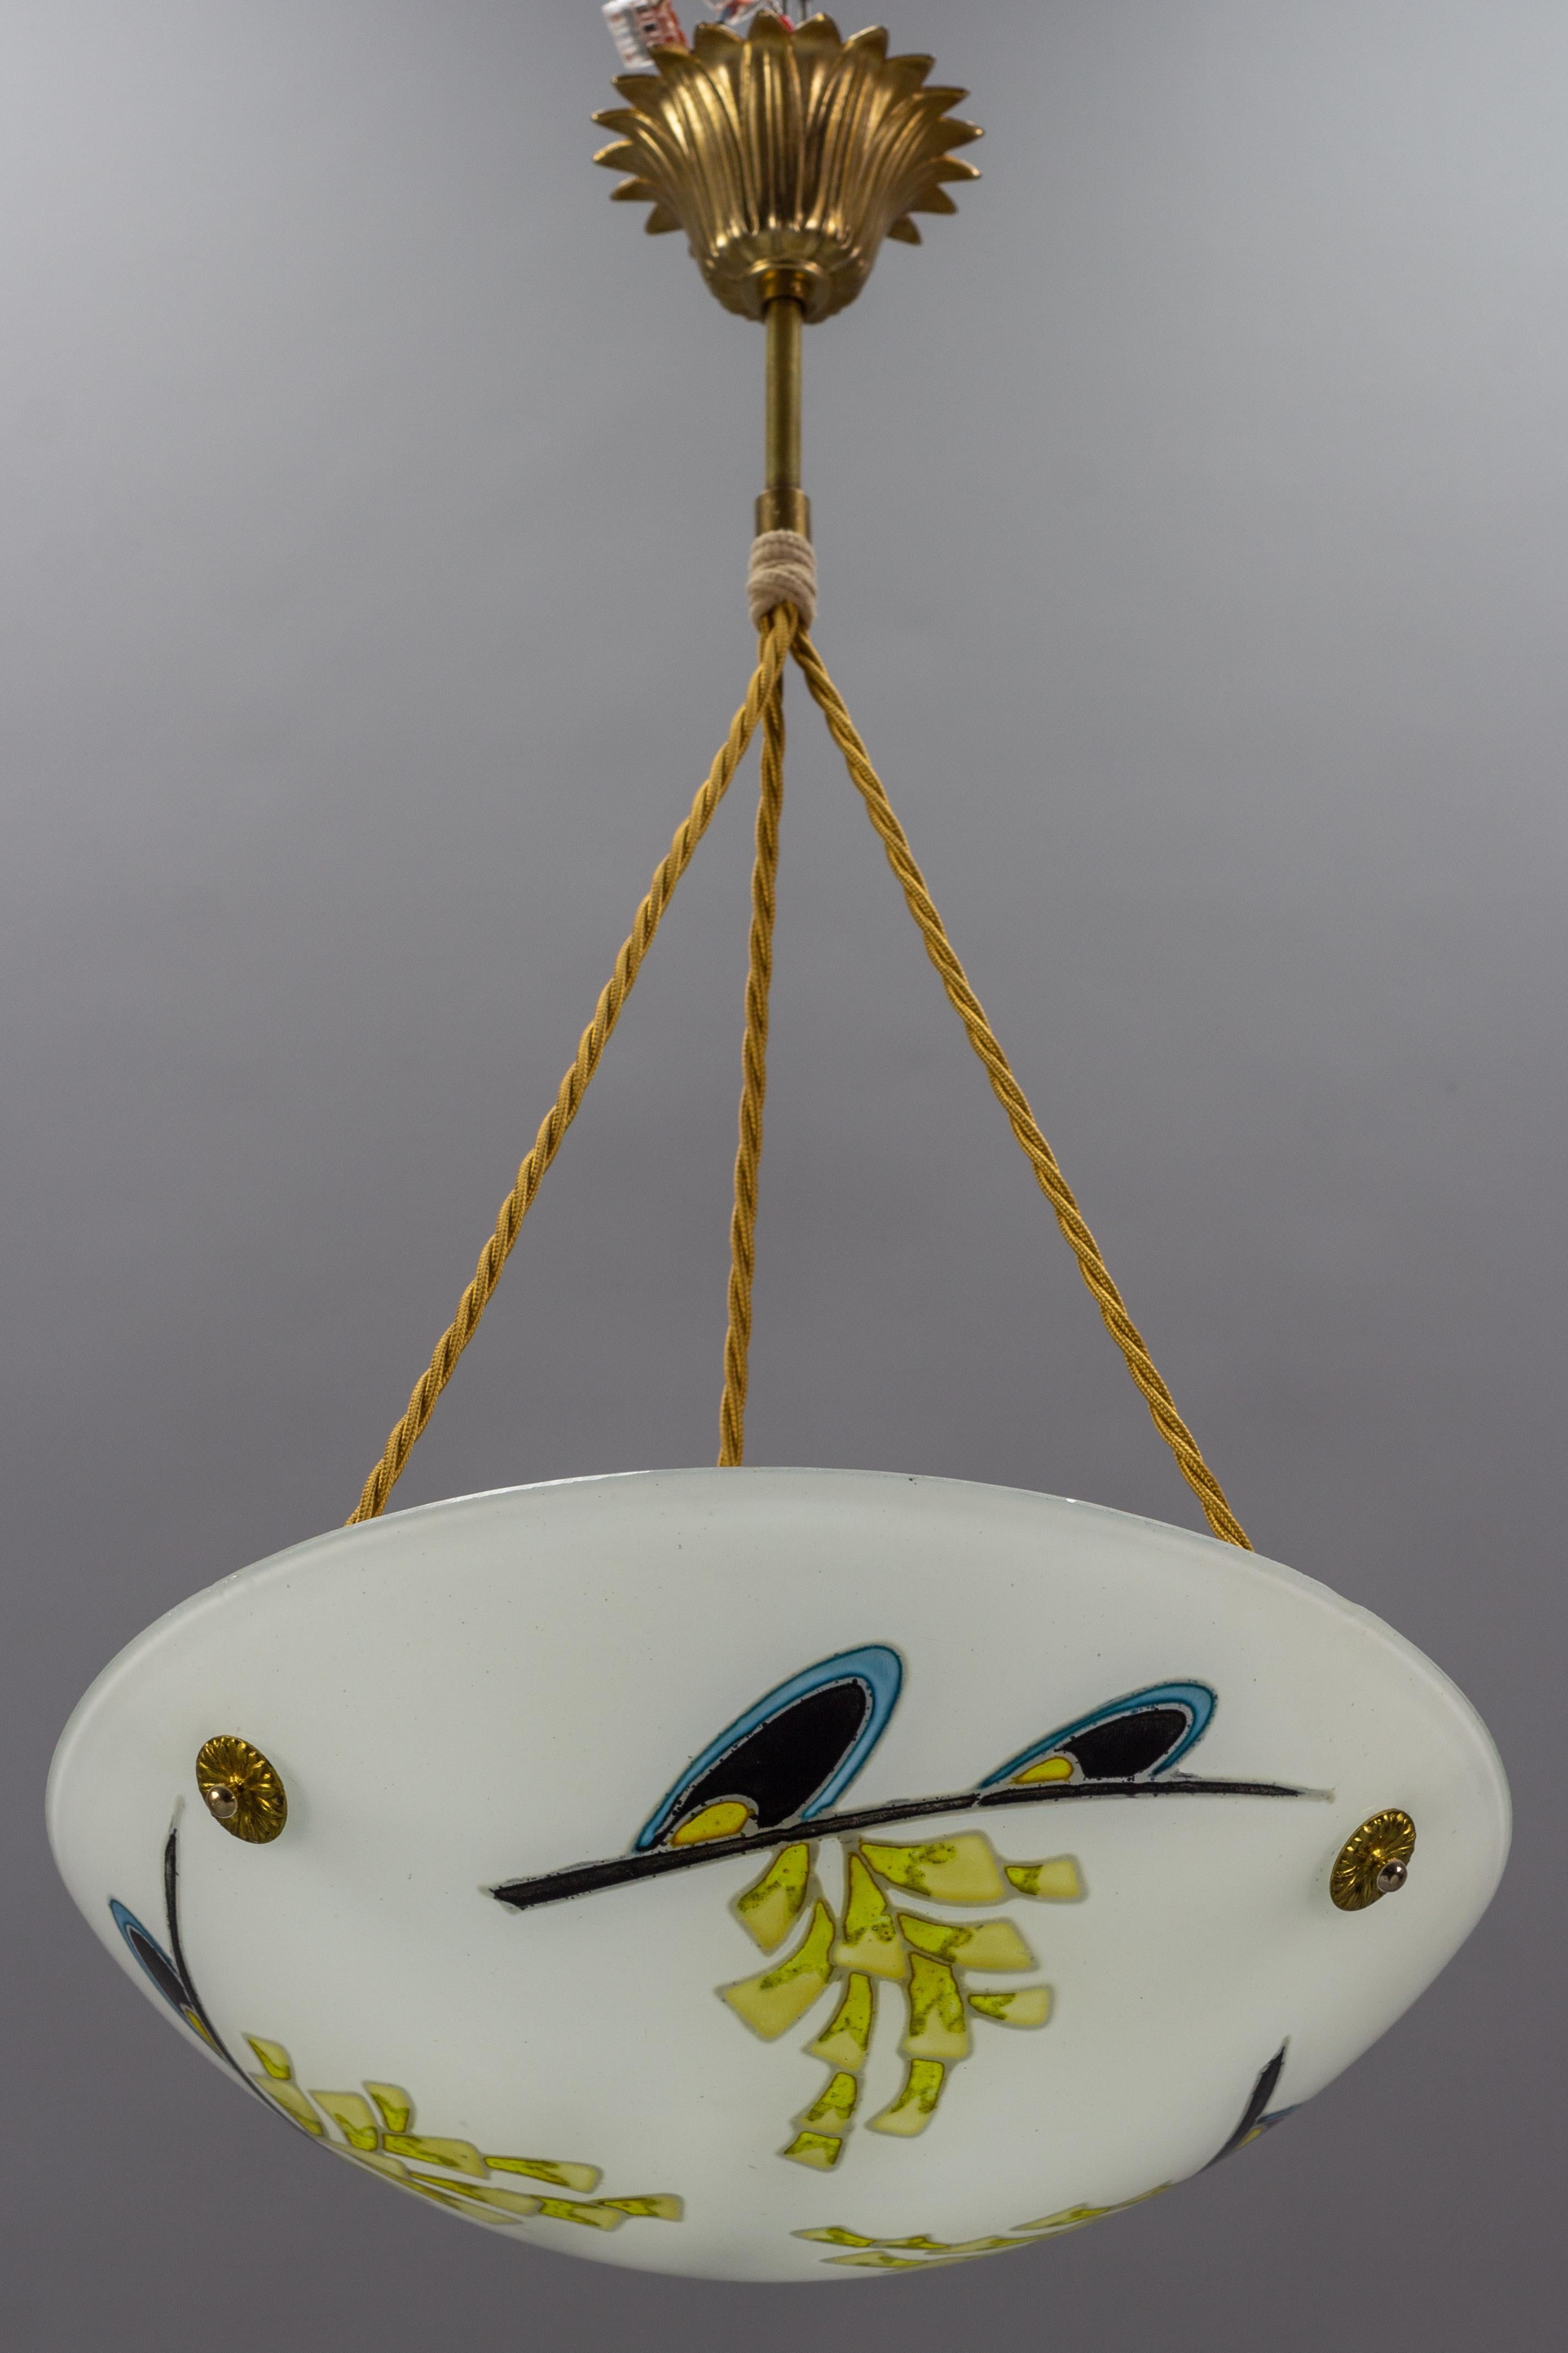 Beautiful French Art Deco pendant chandelier. White glass shade with enameled hand-painted floral design in yellow, blue, and black colors that looks wonderful both lit and unlit. Glass bowl is signed 